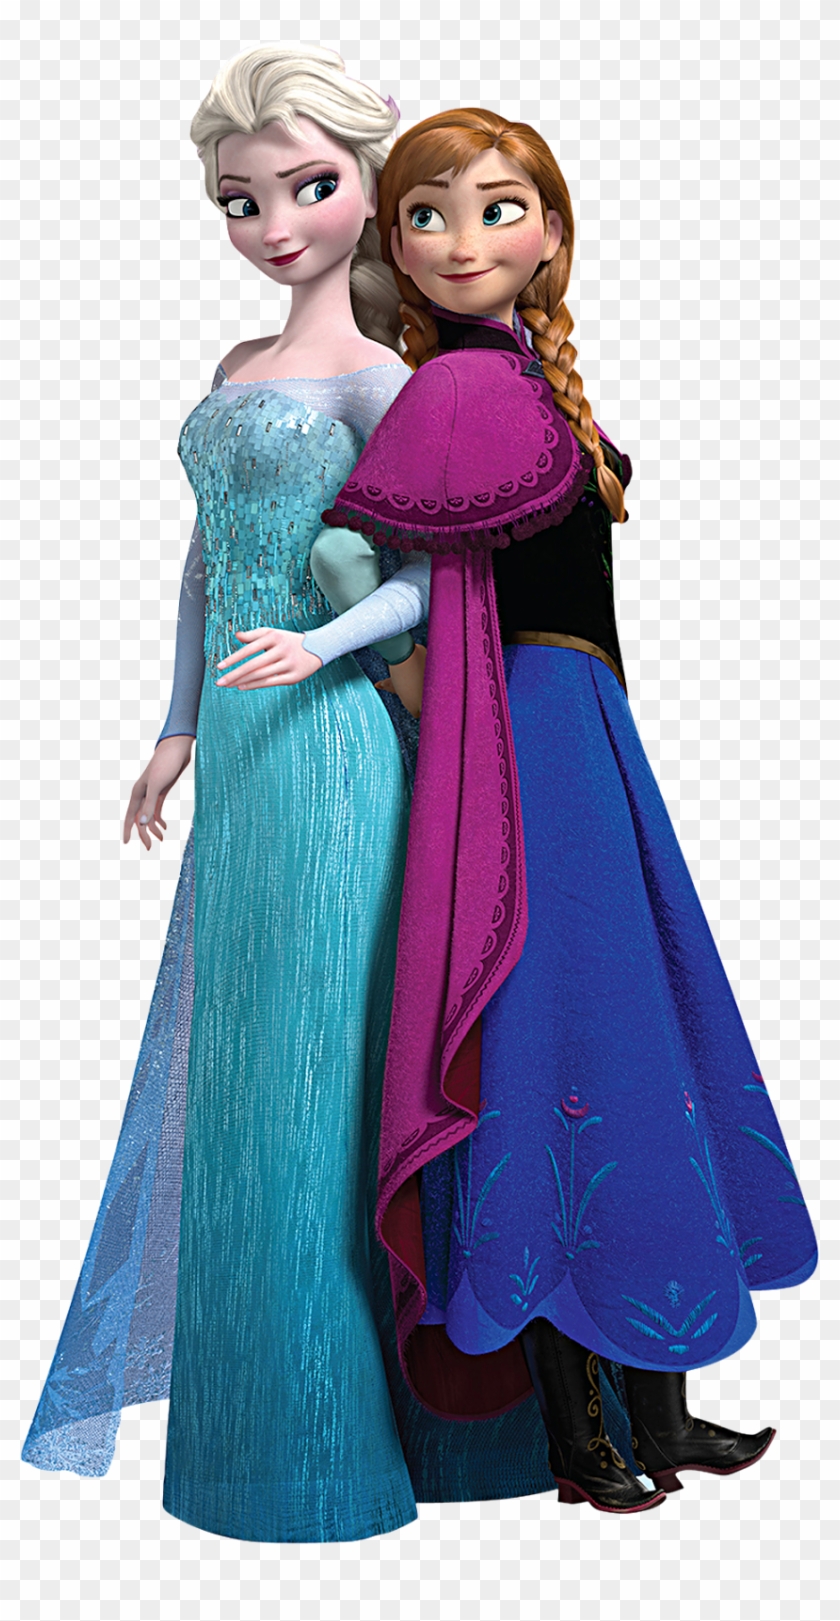 Tons Of Free Clip Art And Birthday Party Stuff Disney - Anna And Elsa - Png Download #2884433